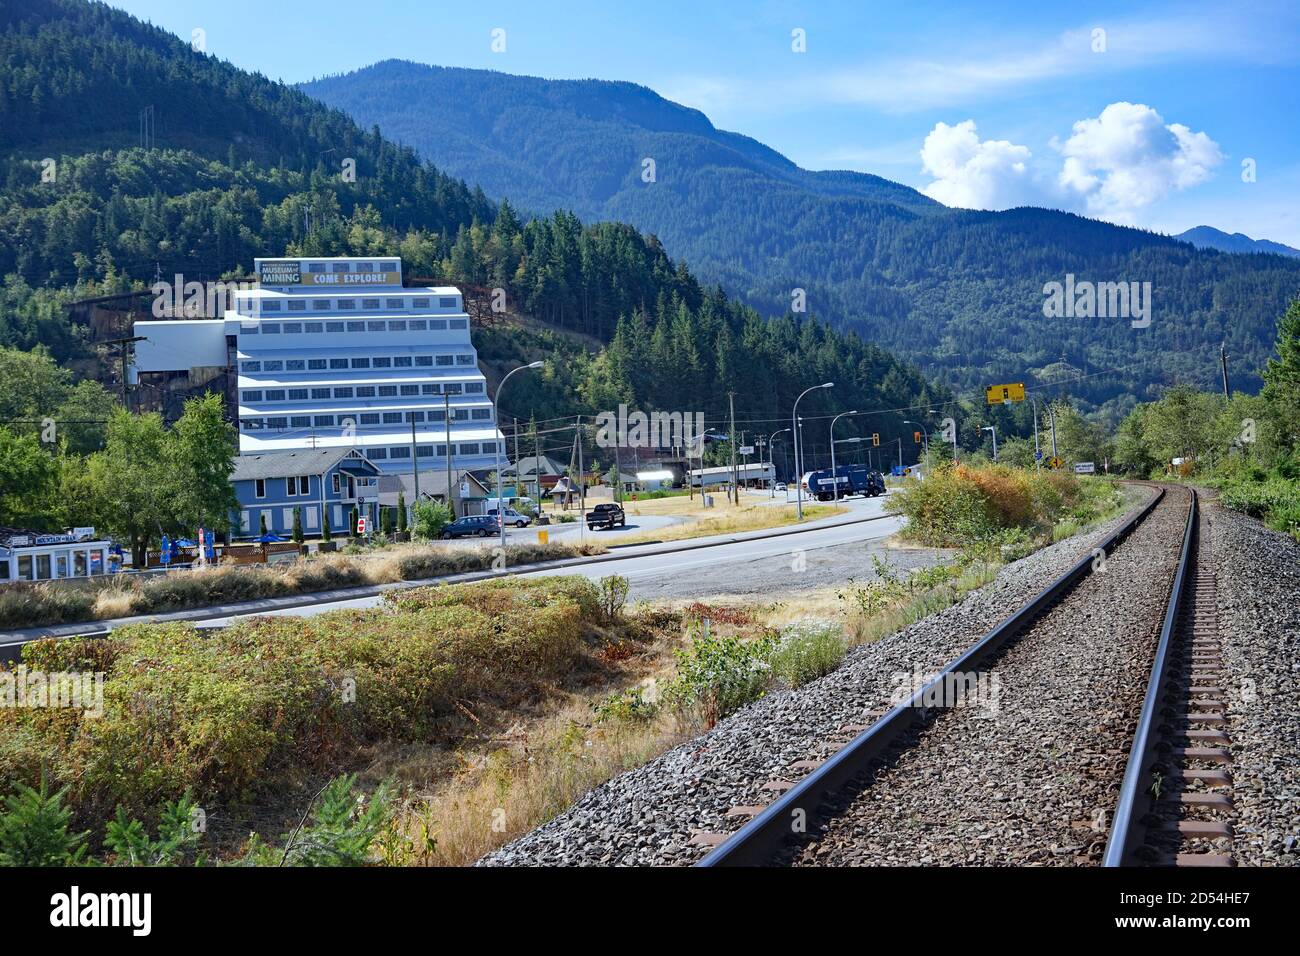 British Columbia, Canada - July 22, 2015:  A mining museum located at the foot of a mountain on the Sea to Sky Highway allows visitors to travel on a Stock Photo